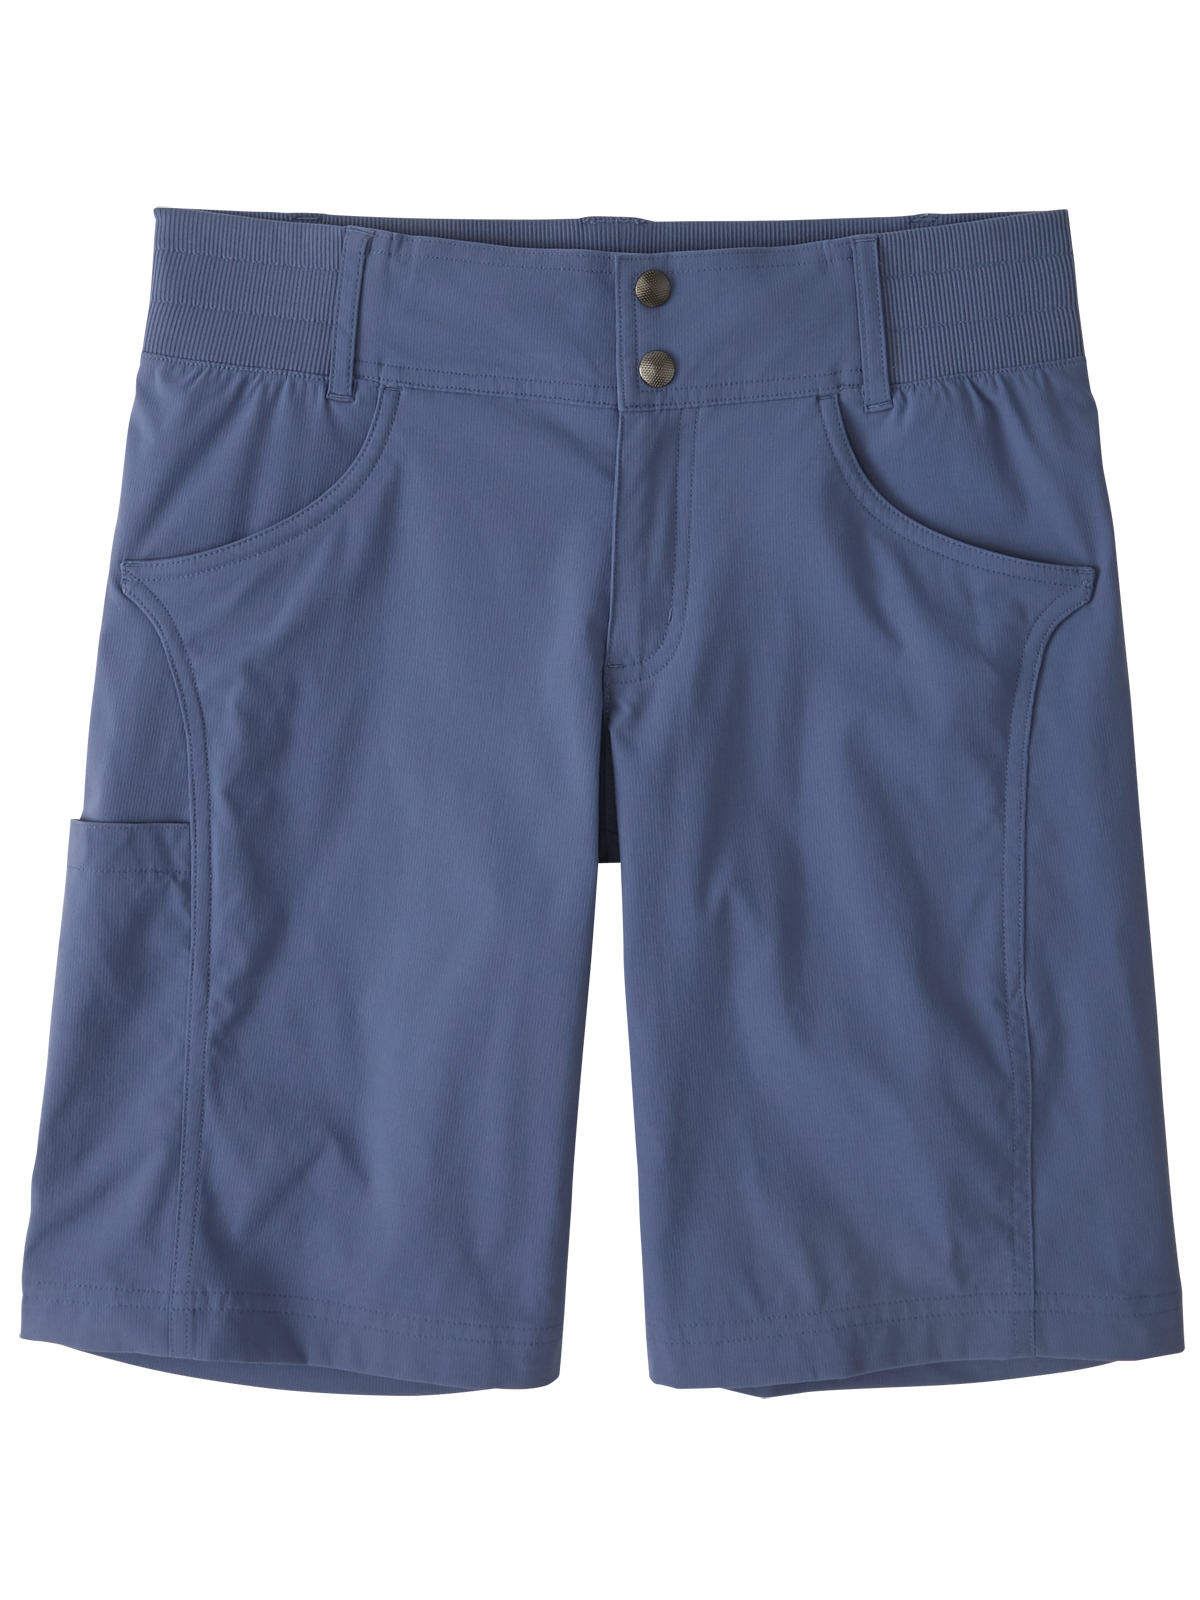 Womens Hiking Shorts: Recycled Clamber 10 inseam